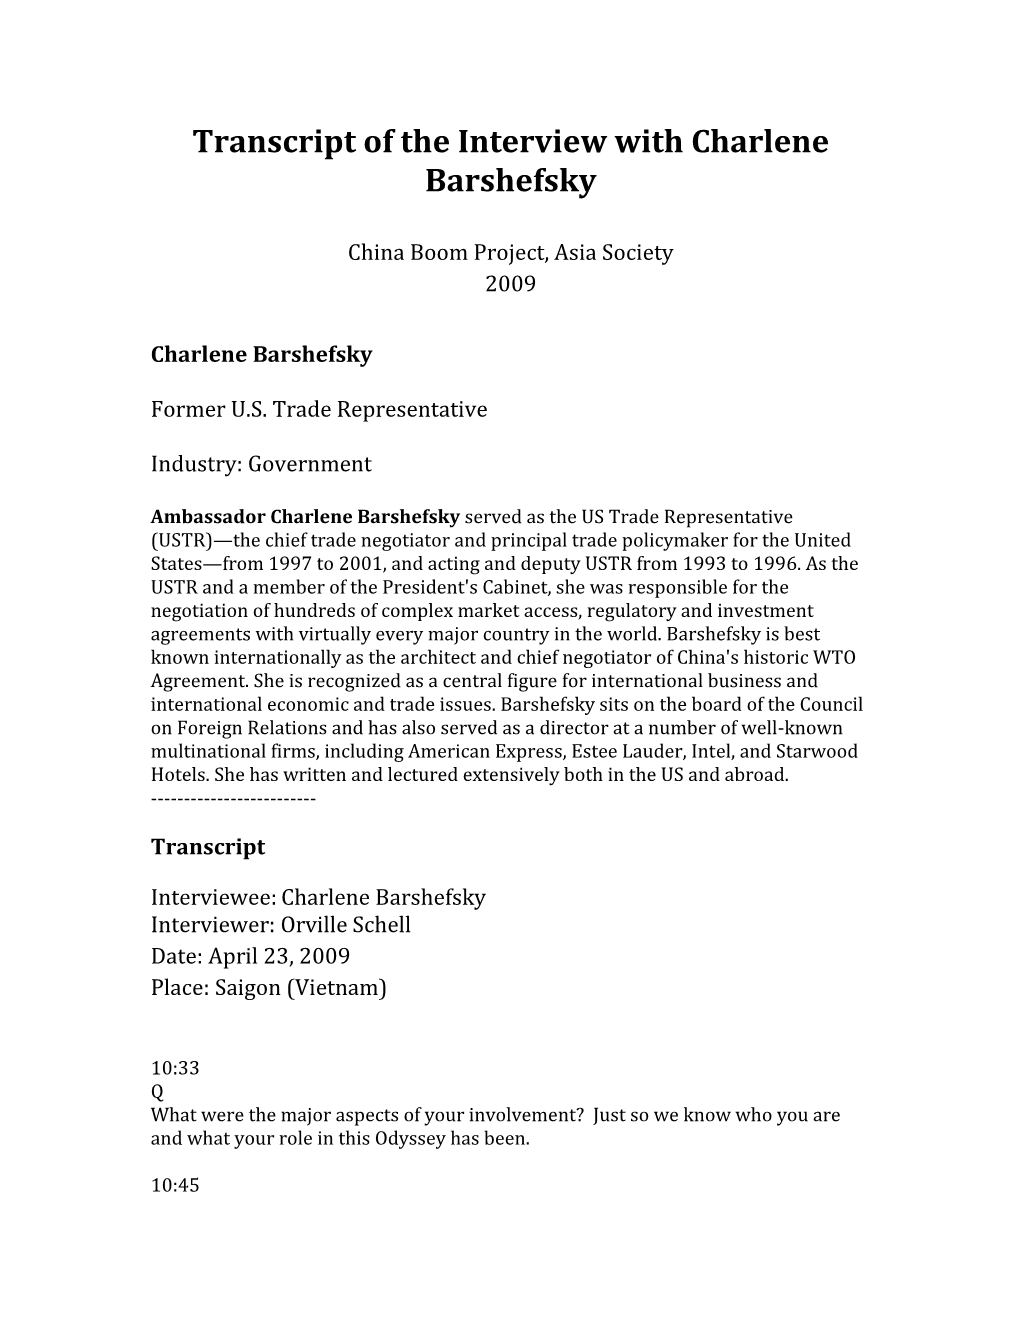 Transcript of the Interview with Charlene Barshefsky